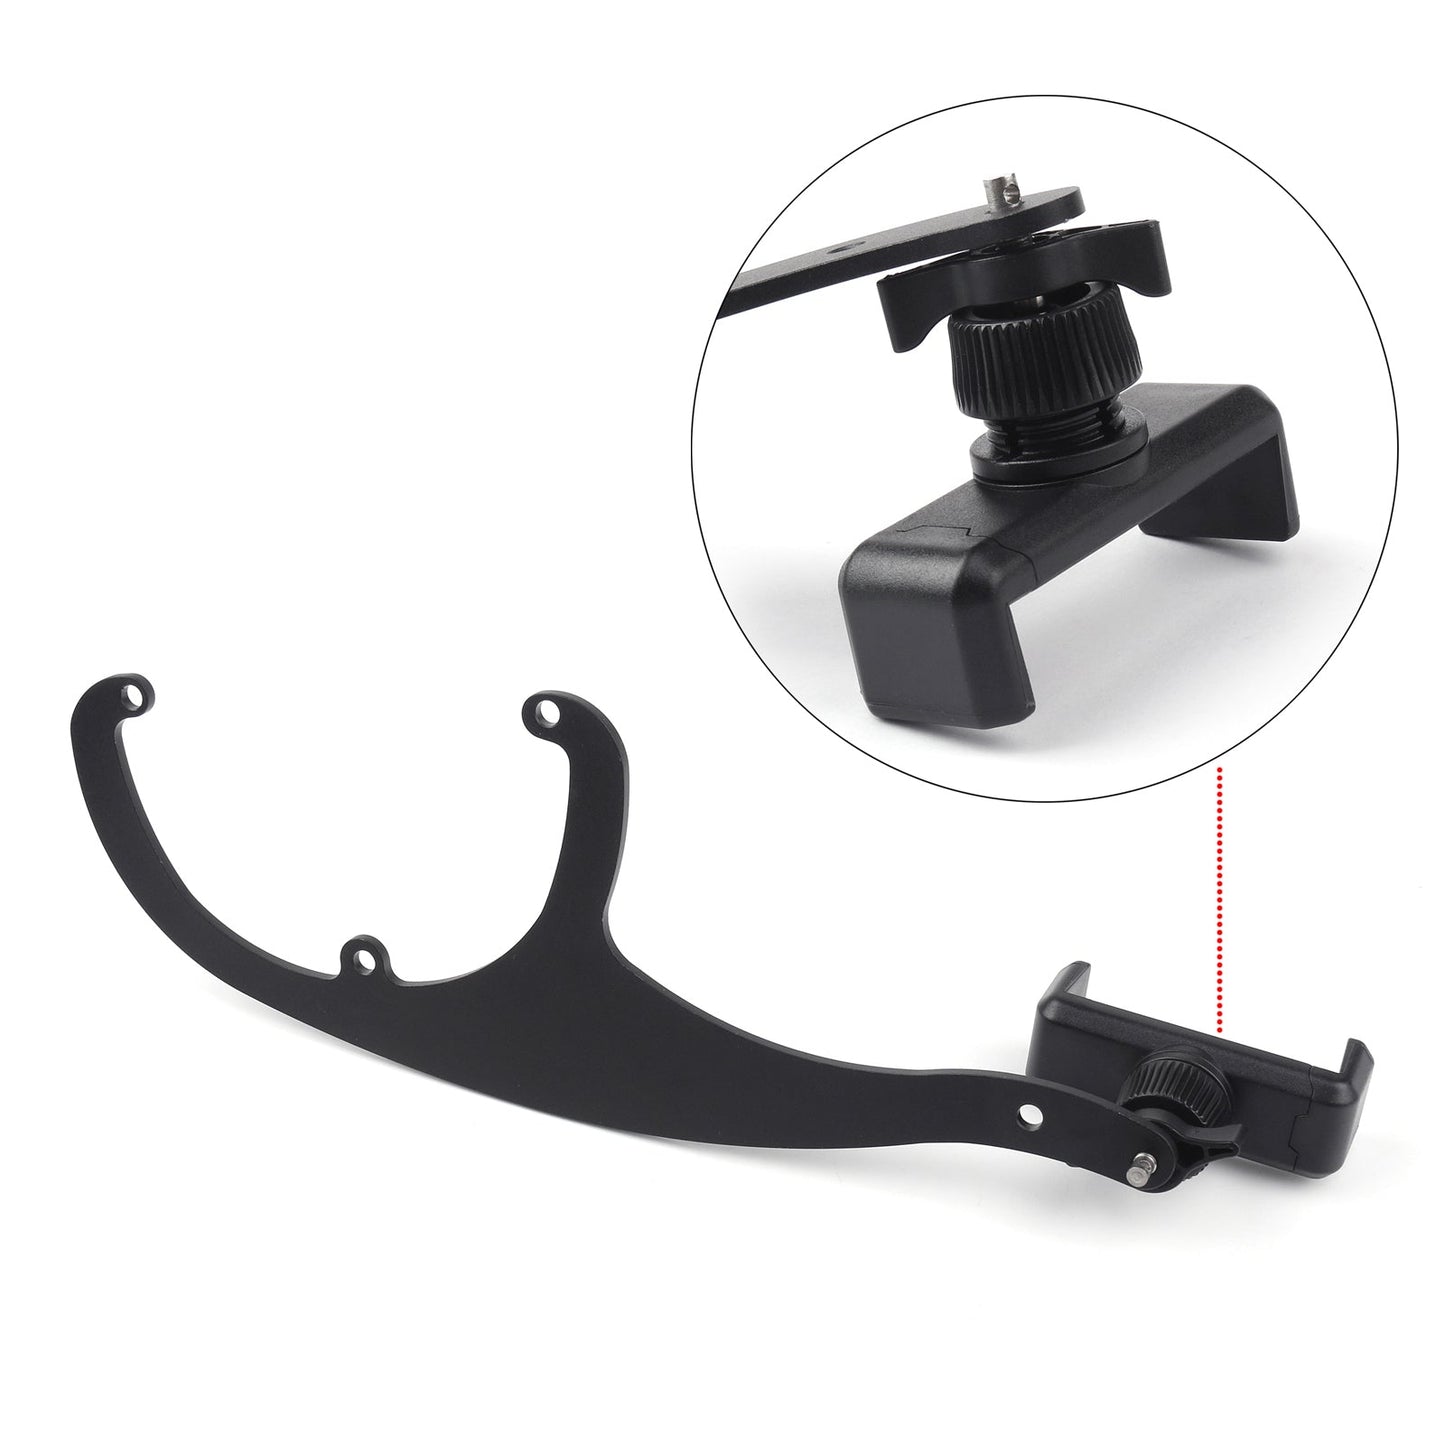 Mini Cooper R55 R56 Rotation Car Moible Phone Mount Cradle Holder Stand